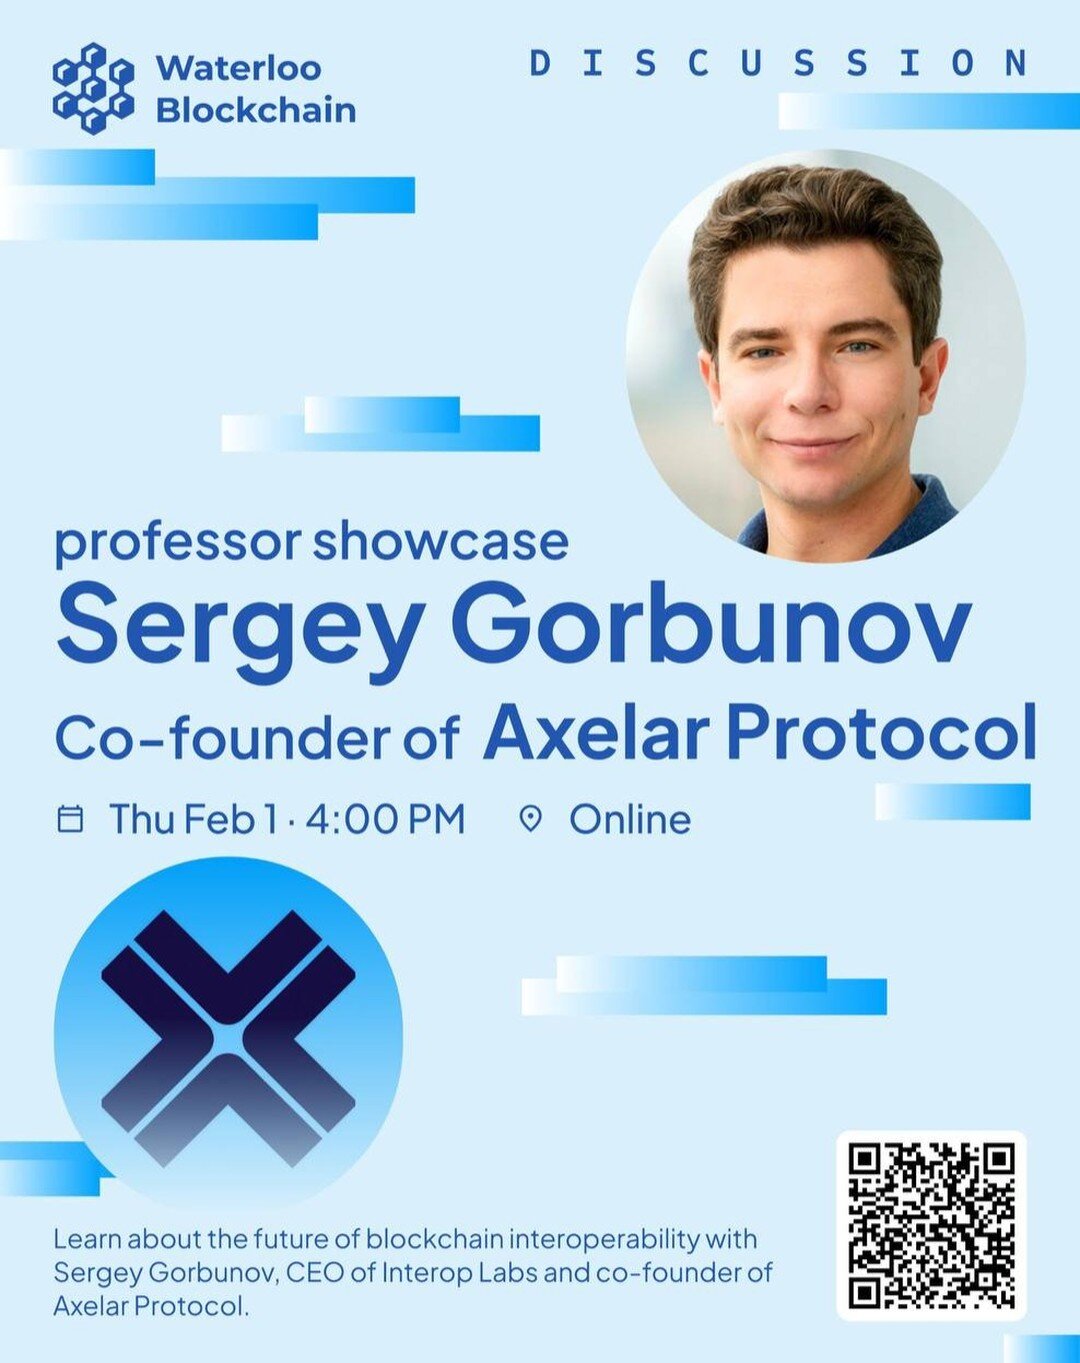 We are thrilled to welcome Sergey Gorbunov, Co-founder of Axelar, and PhD at MIT, and Associate Professor at the University of Waterloo to speak at our next research discussion circles event. 

This will be happening on Thursday February 1st at 4pm o